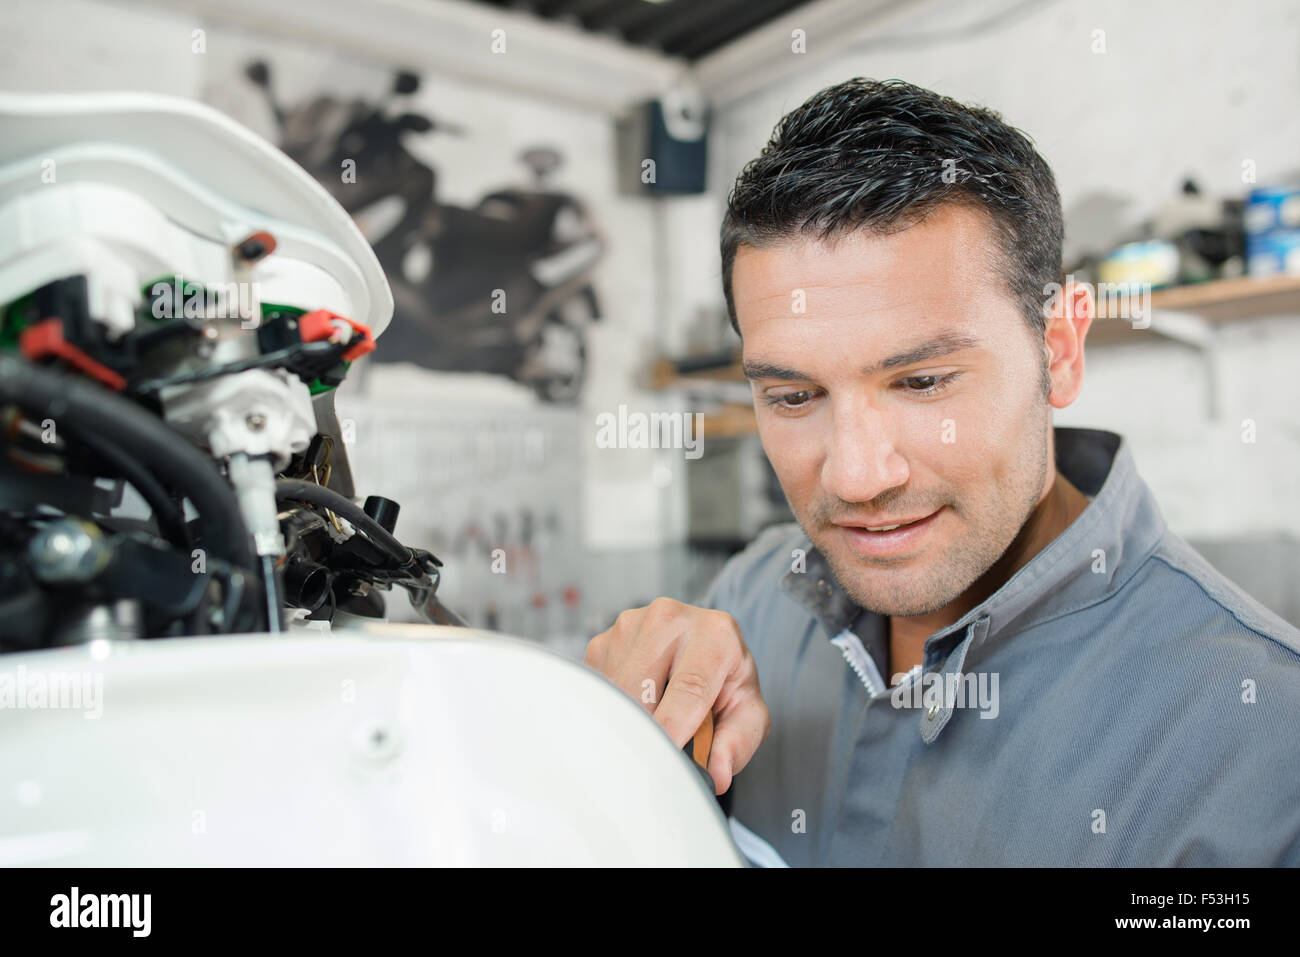 Mechanic working on a scooter Stock Photo